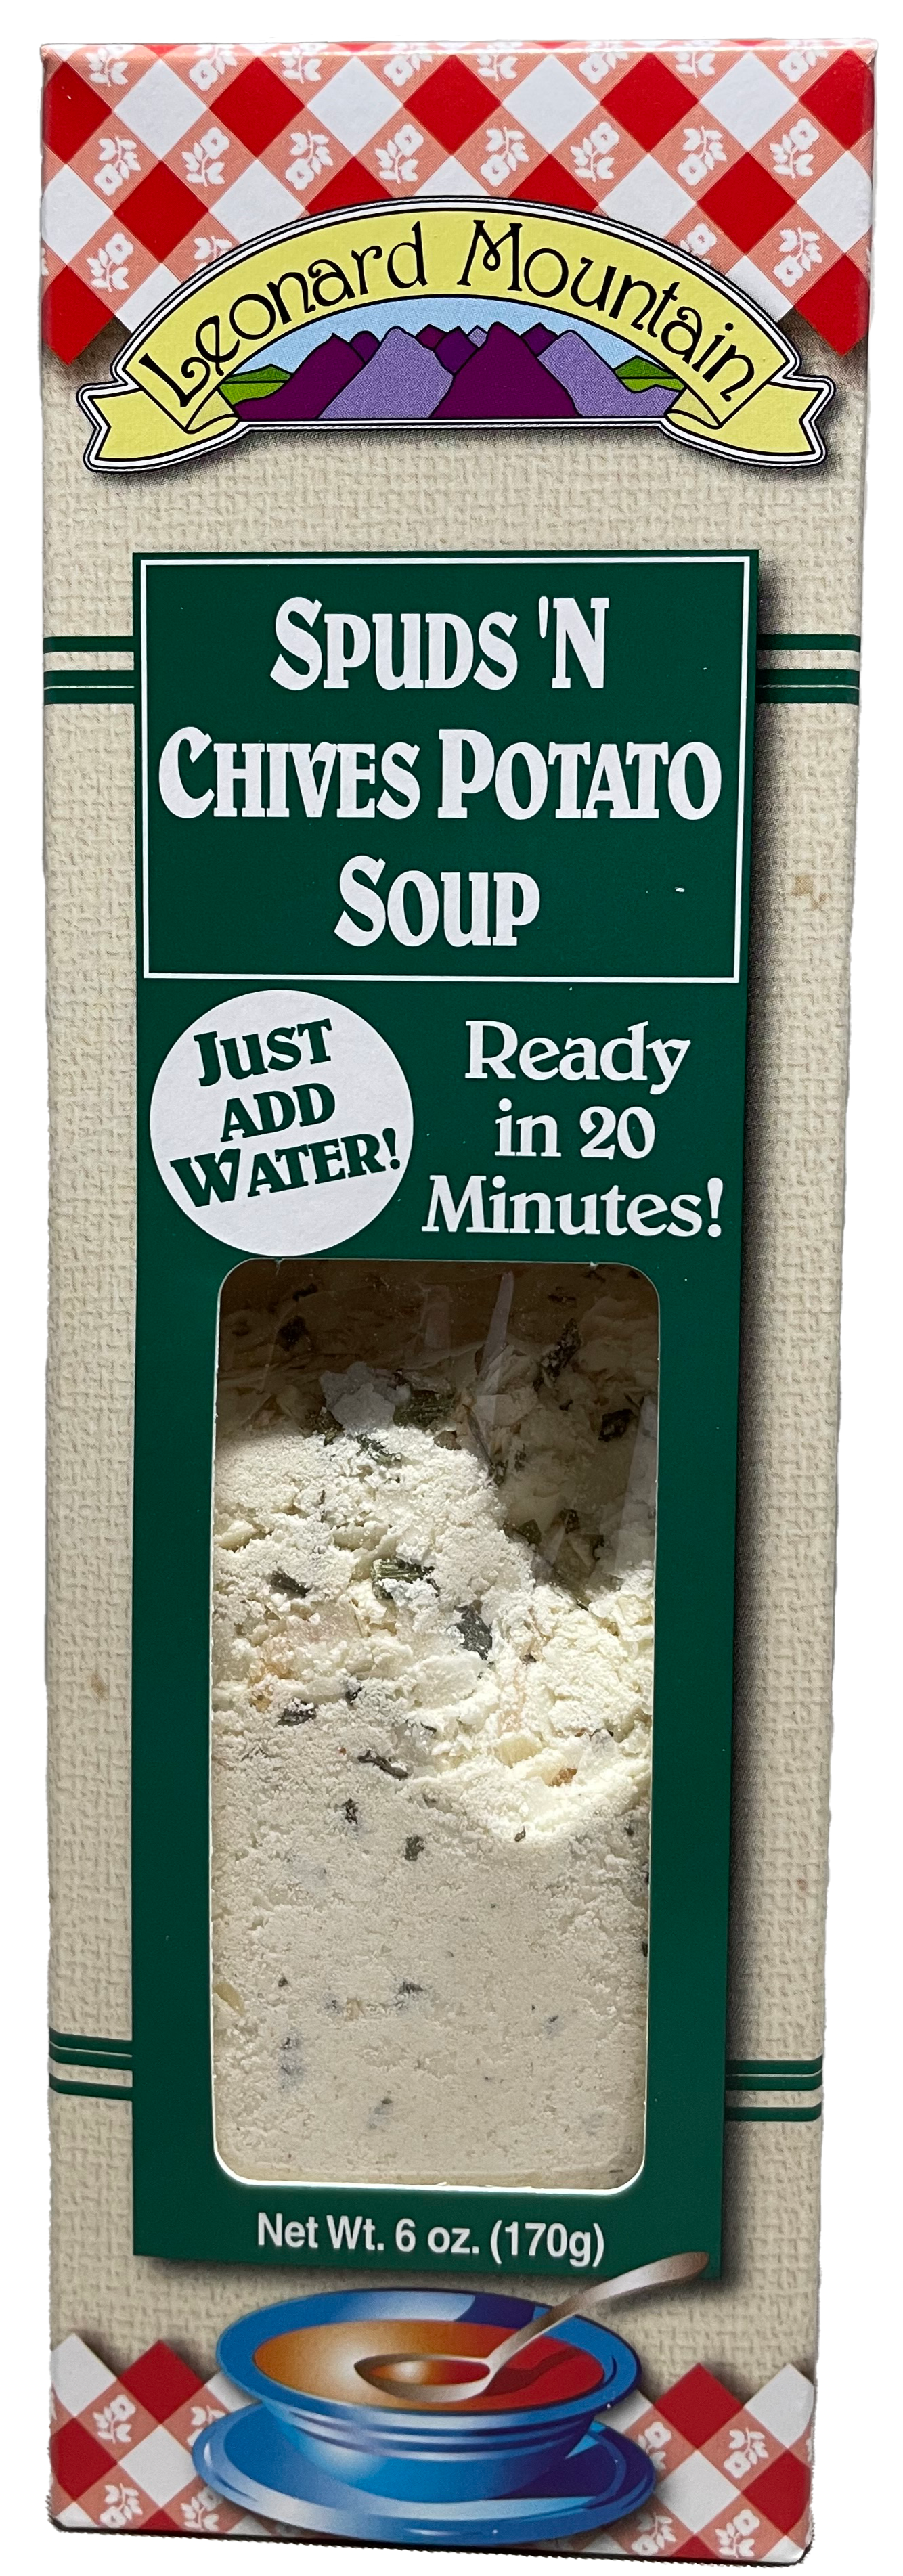 Spuds 'n Chives Potato Soup *NEW LOWER PRICE!*